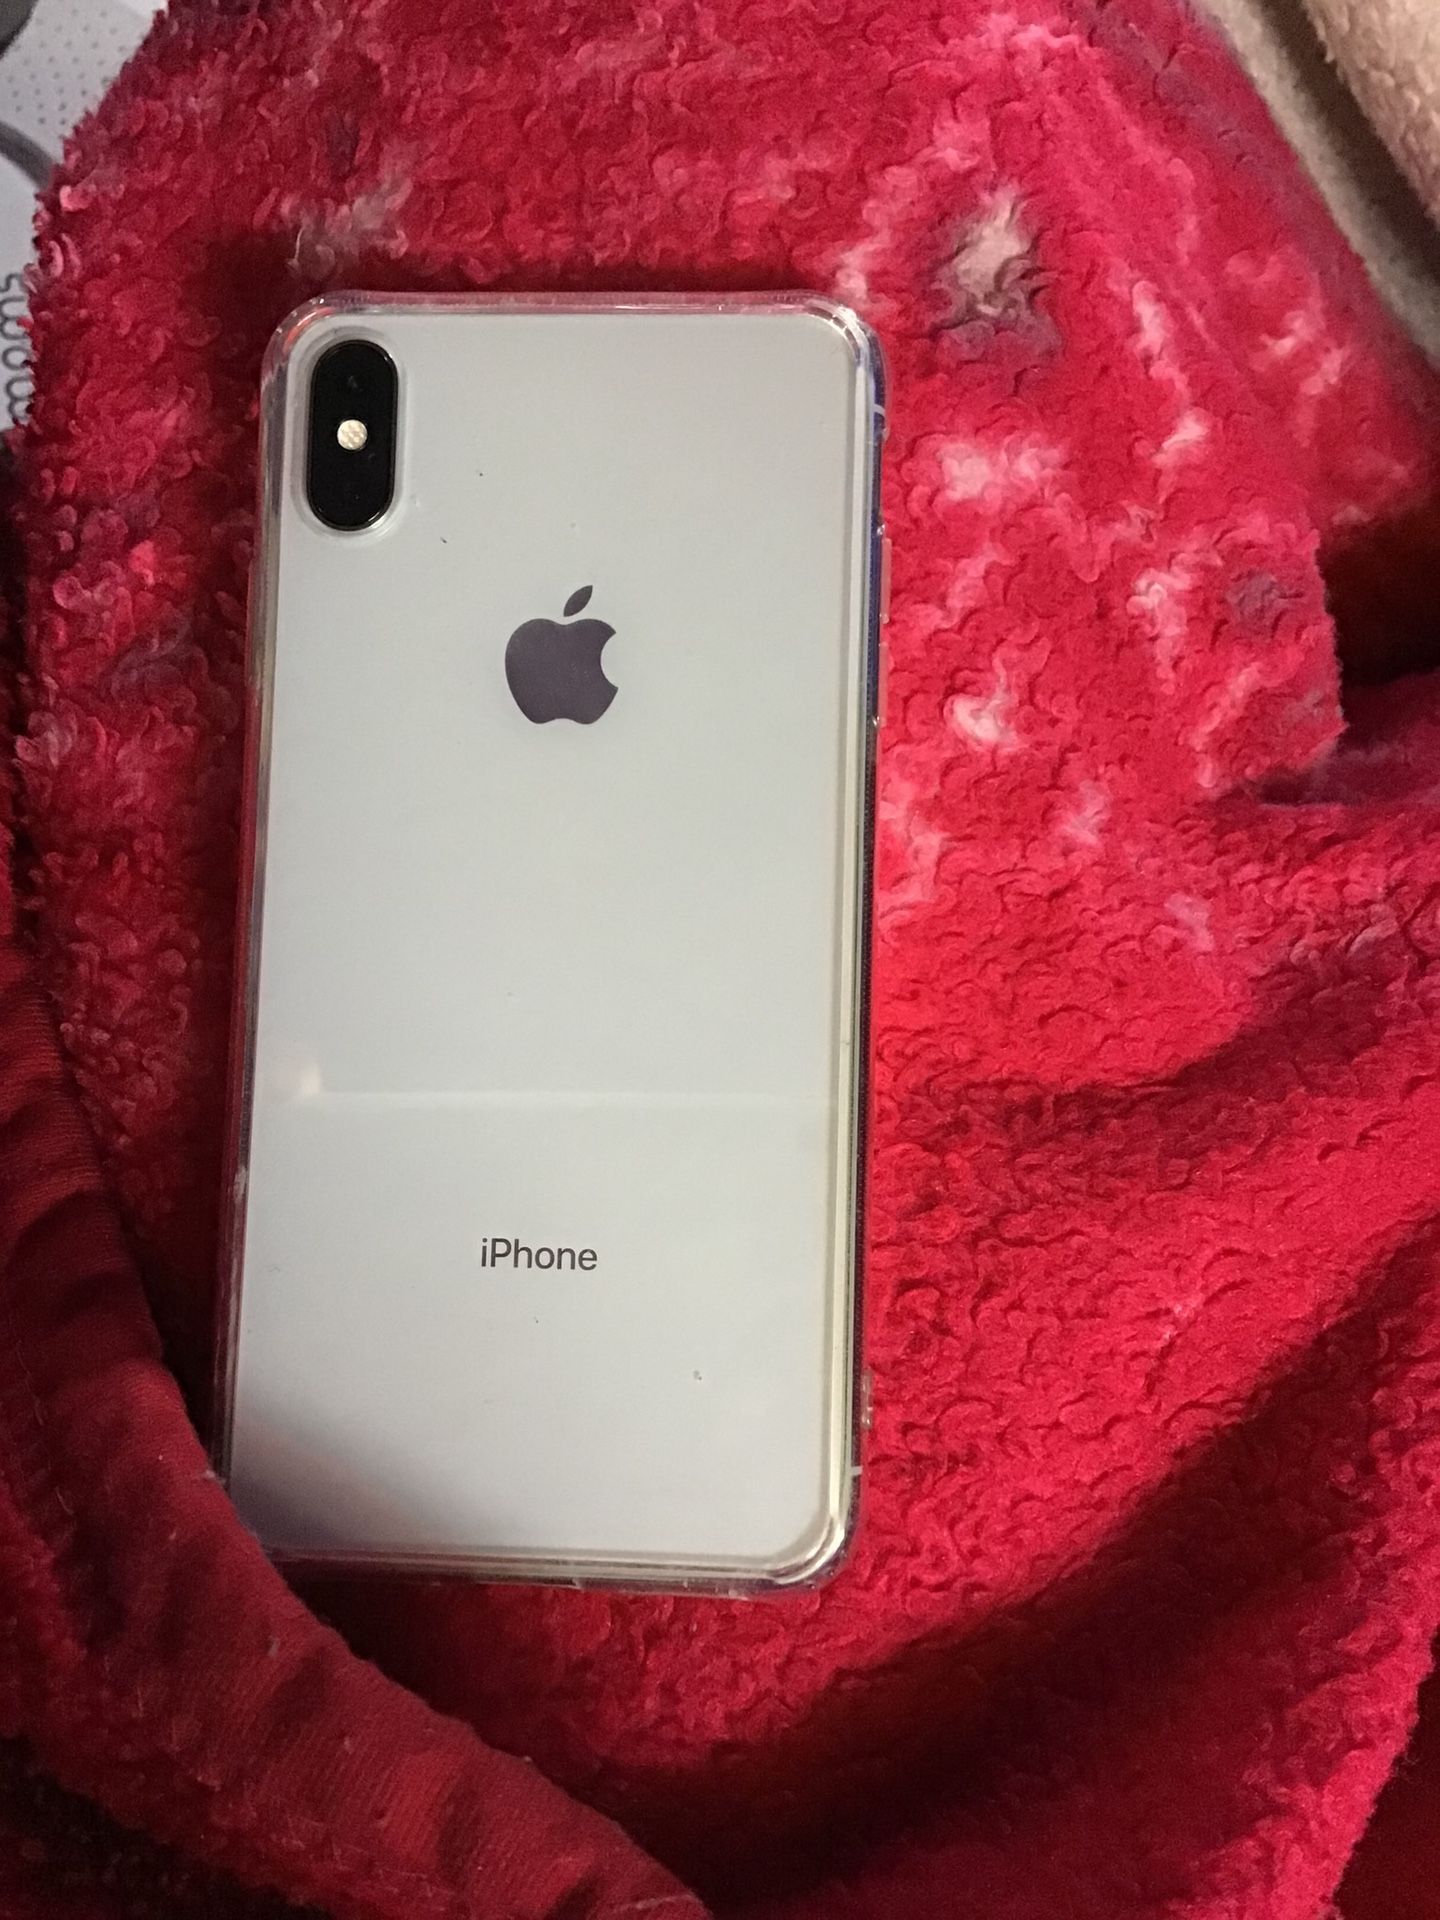 Att iPhone XS Max 256gb. Looking to trade for a iPhone X att or unlocked and cash.